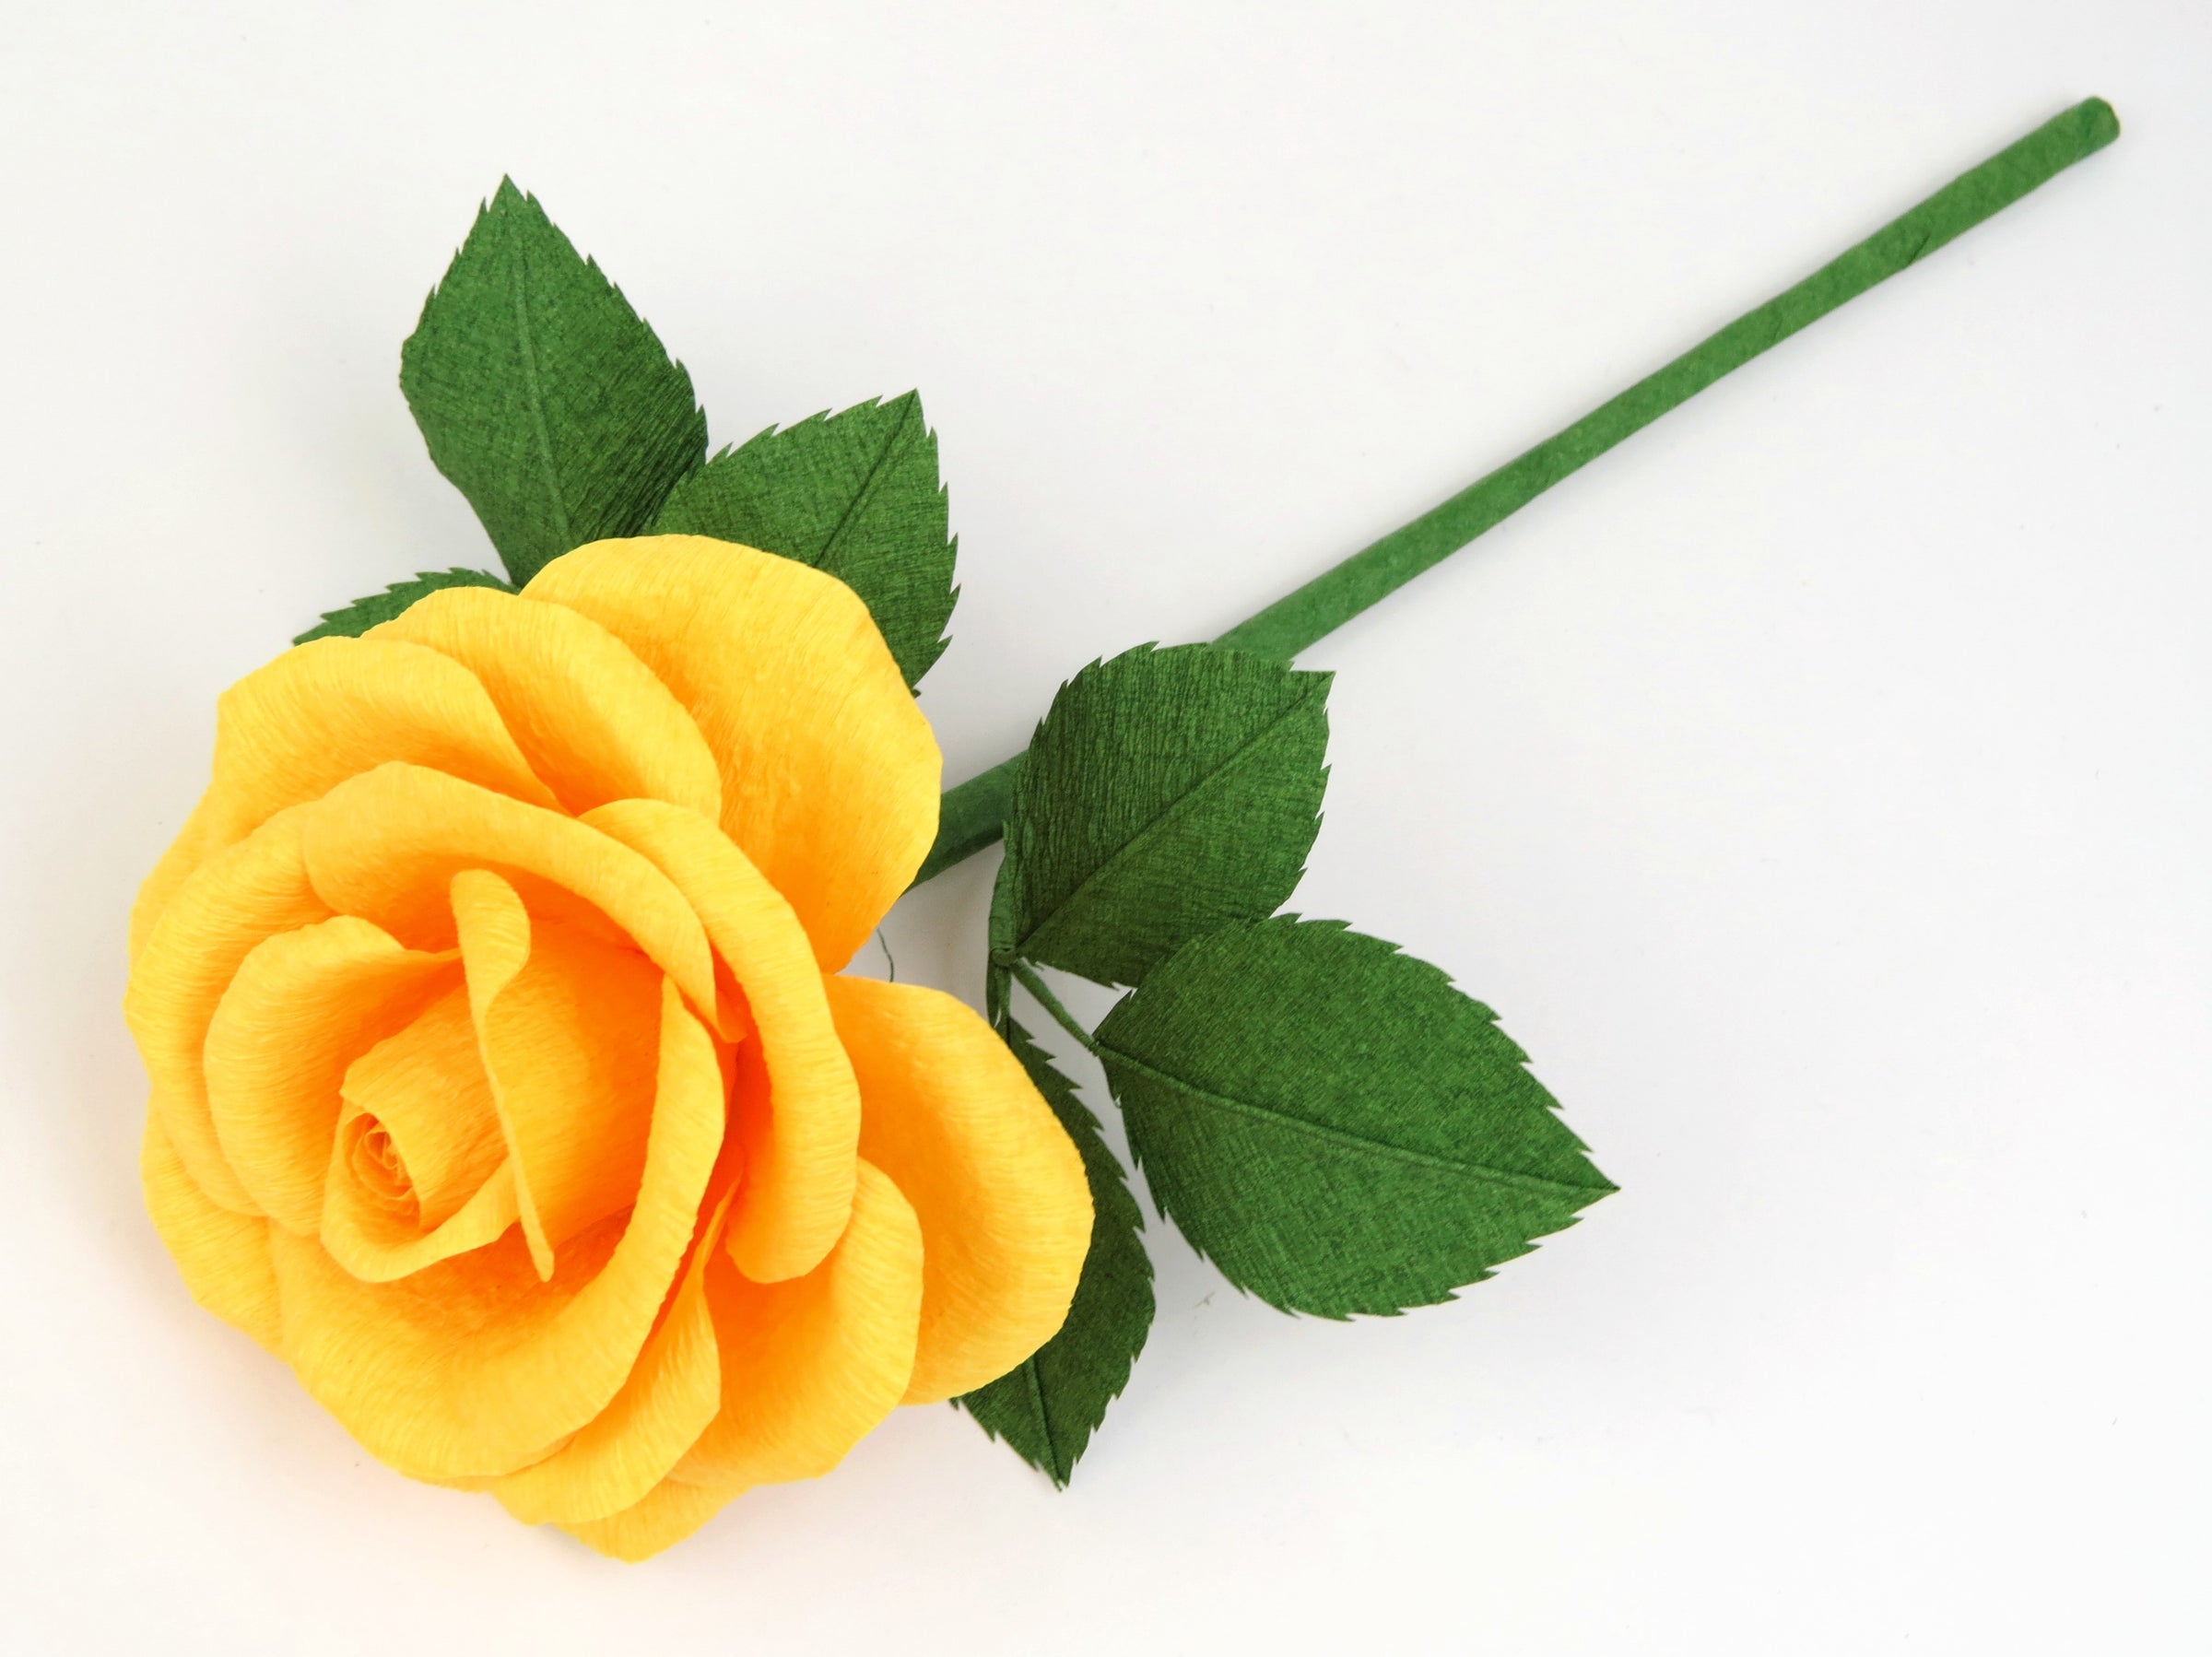 Bright yellow rose lying diagonally across a white background with six green leaves